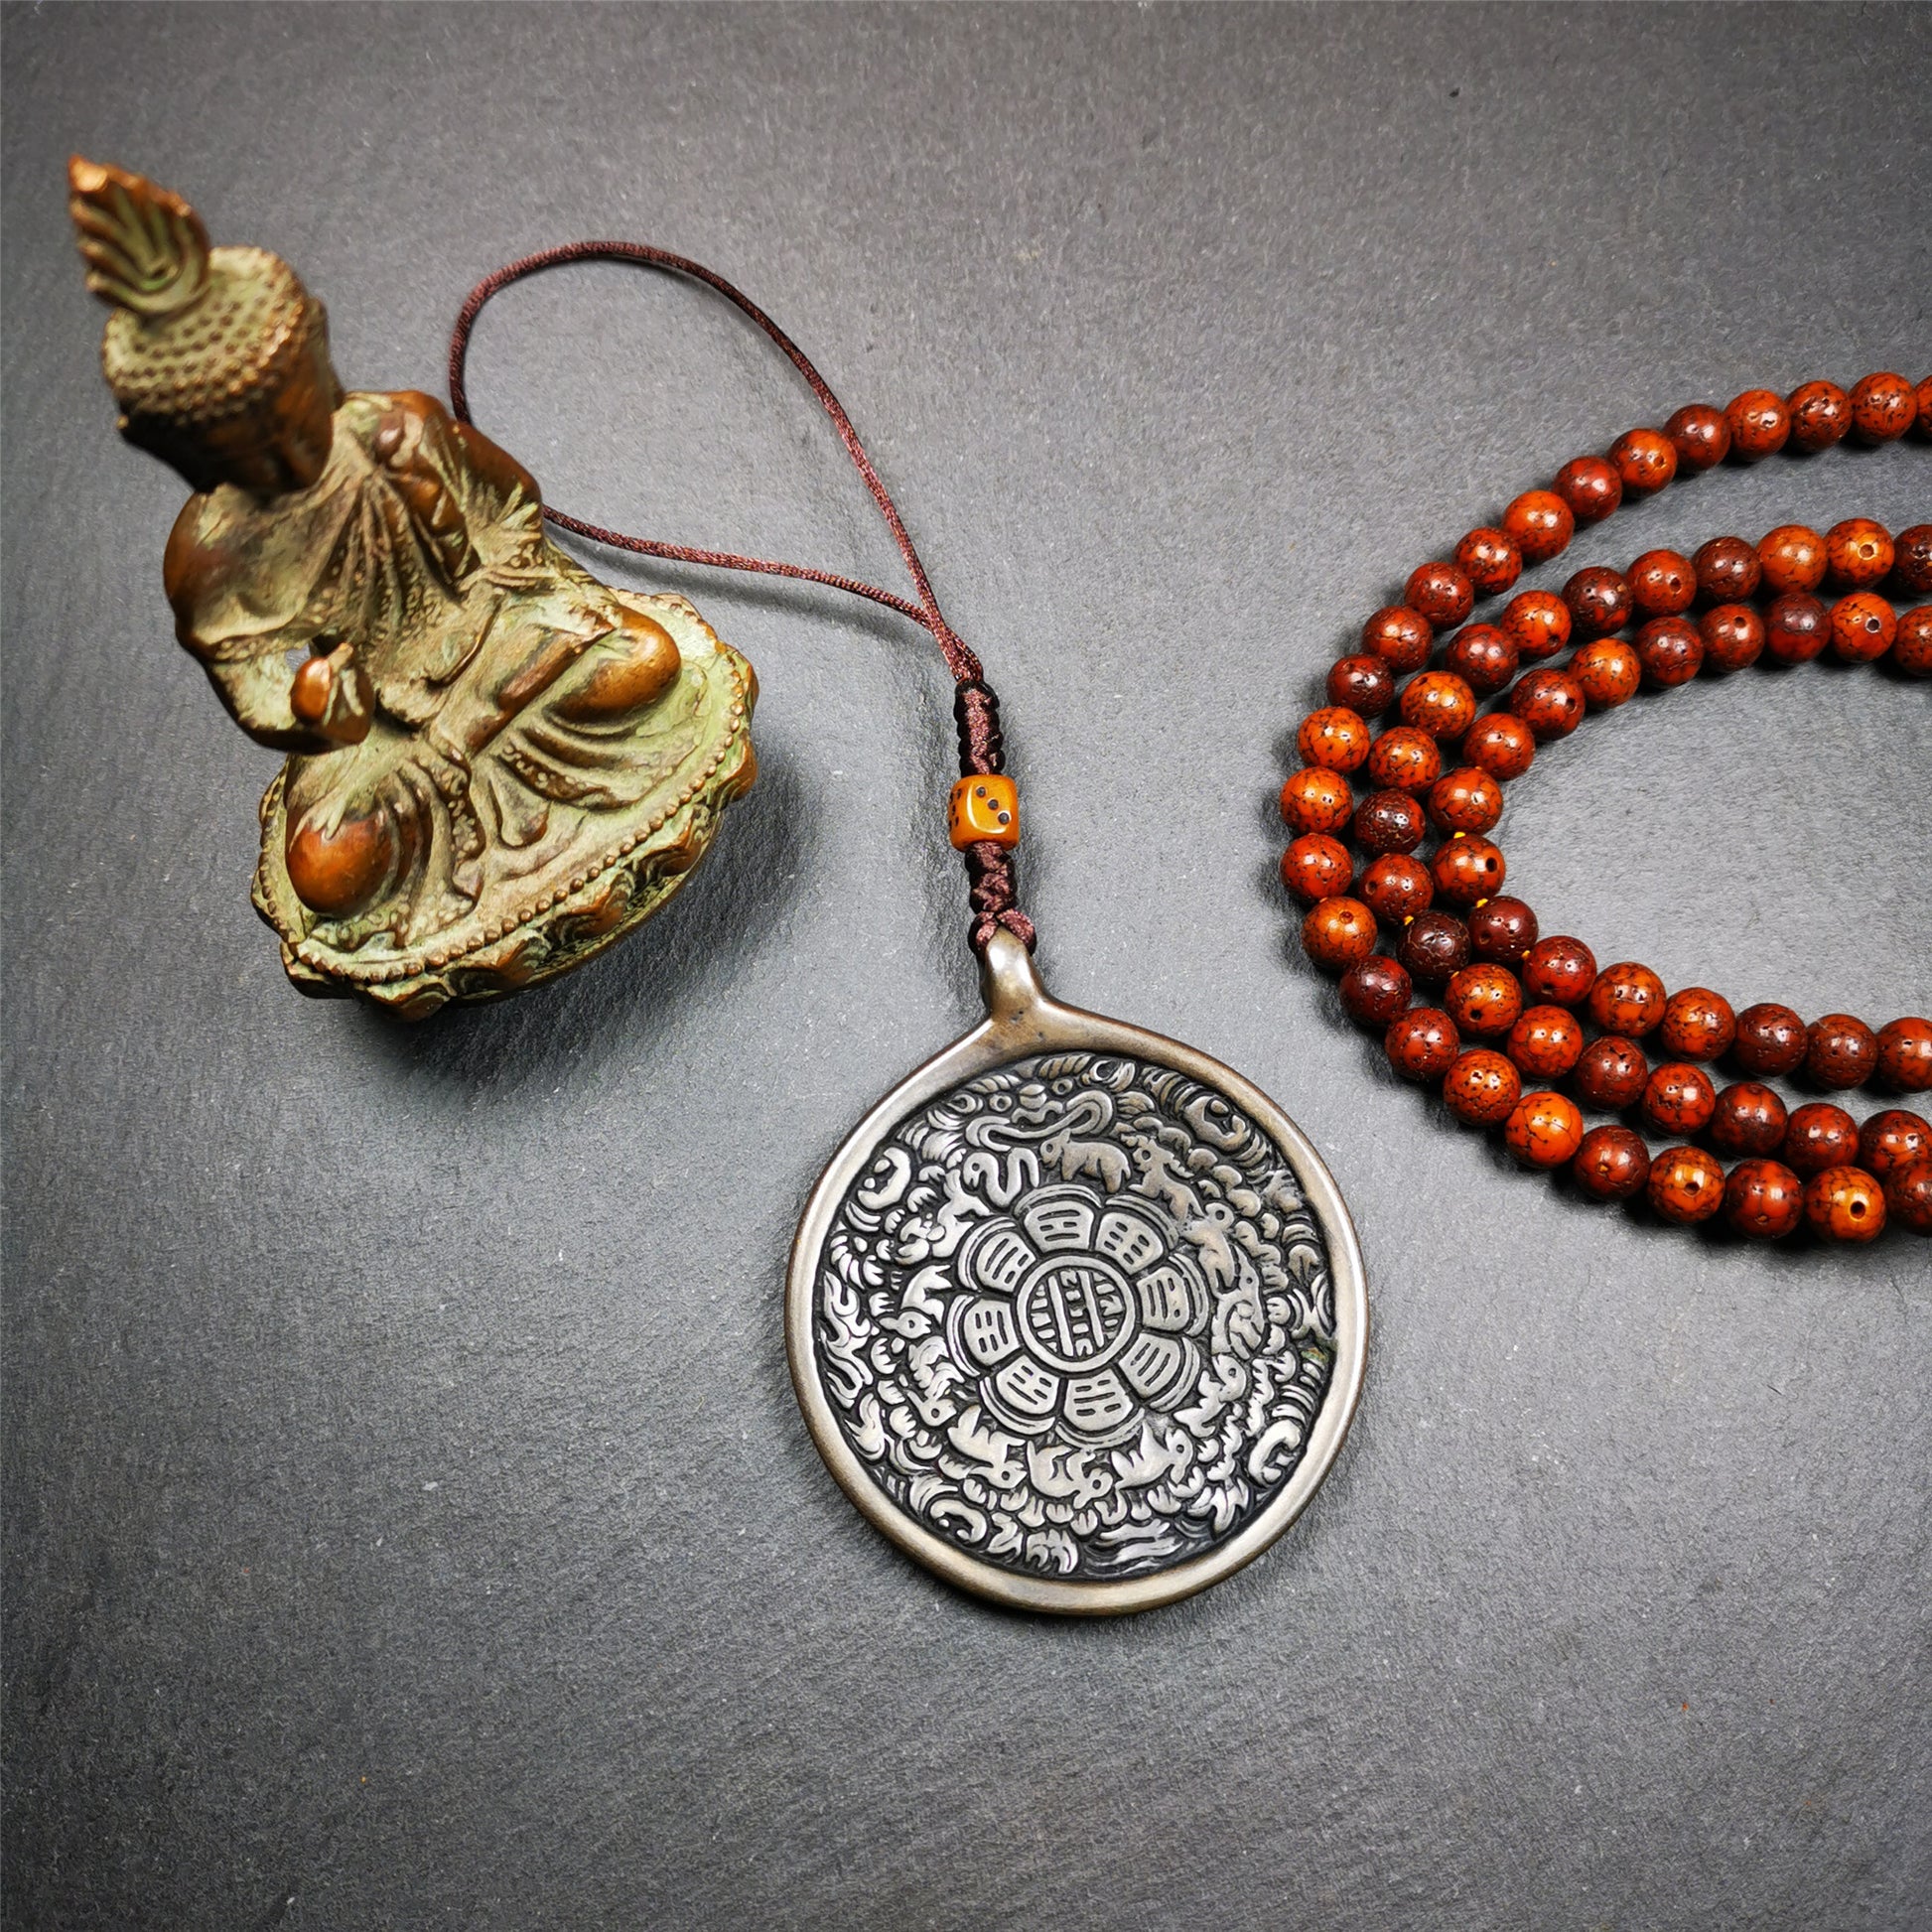 This unique tibetan melong badge was collected from Baiyu Monastery for 30 years. It's a Astrology Protective Amulet Pendant,made of copper. The pattern is Tibetan Budhist Protective Amulet Pendant - SIPAHO(srid pa ho).  SIPAHO Melong Amulet on the cord,when on a go or travelling, it's placed as a waist badge. You can make it into pendant,keychain, bag hanging,or just put it on your desk,as an ornament.